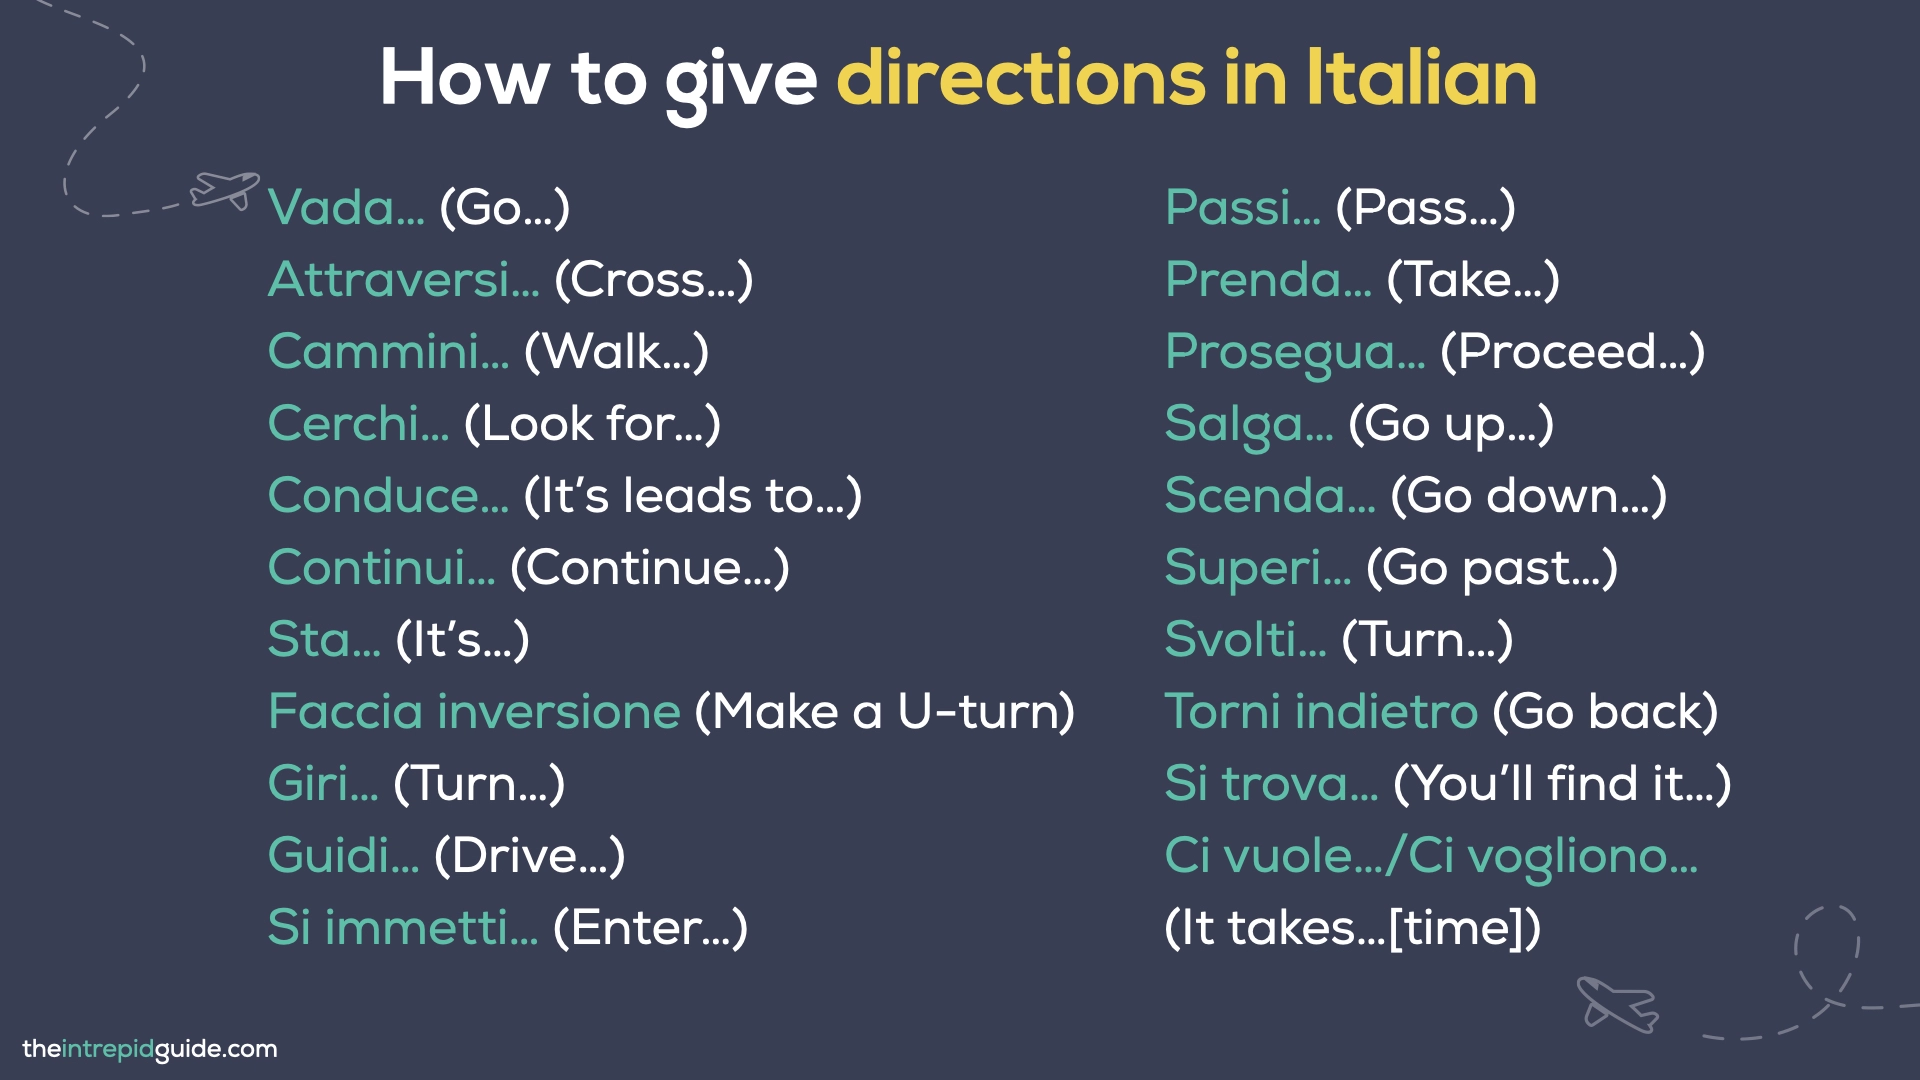 Directions in Italian - How to give directions in Italian